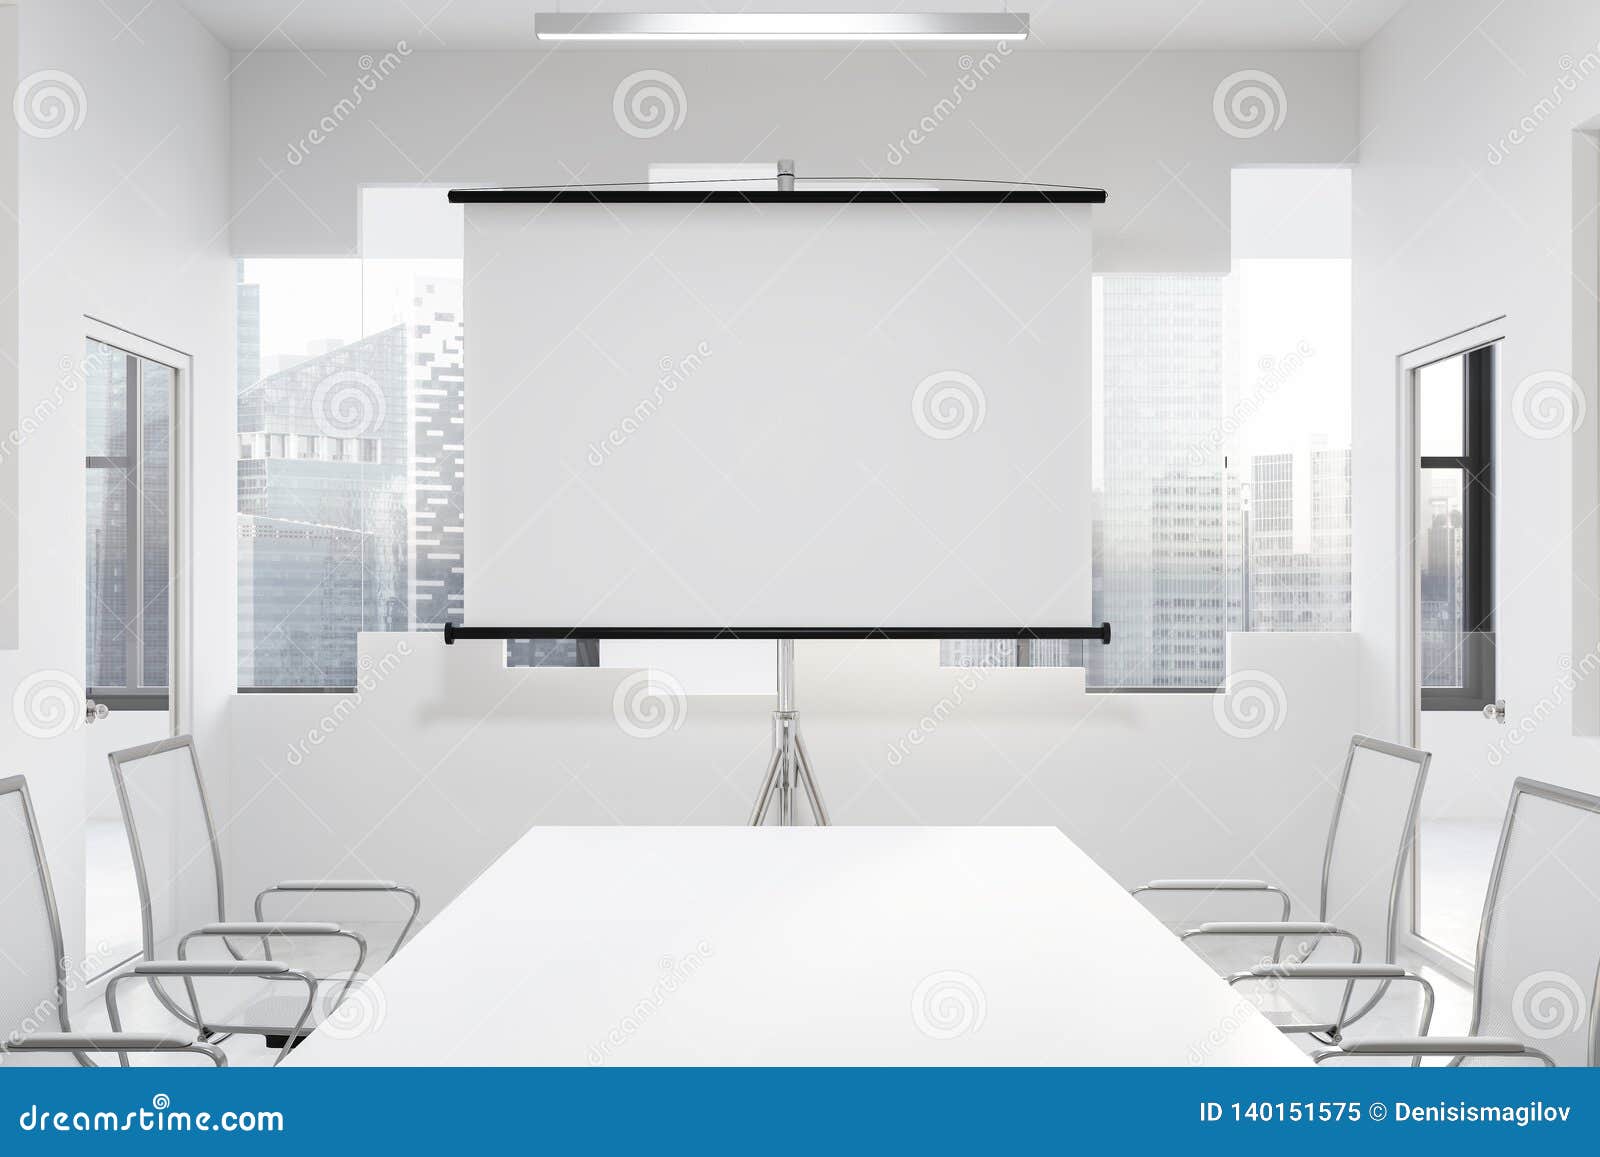 White Meeting Room Interior With Screen Stock Illustration